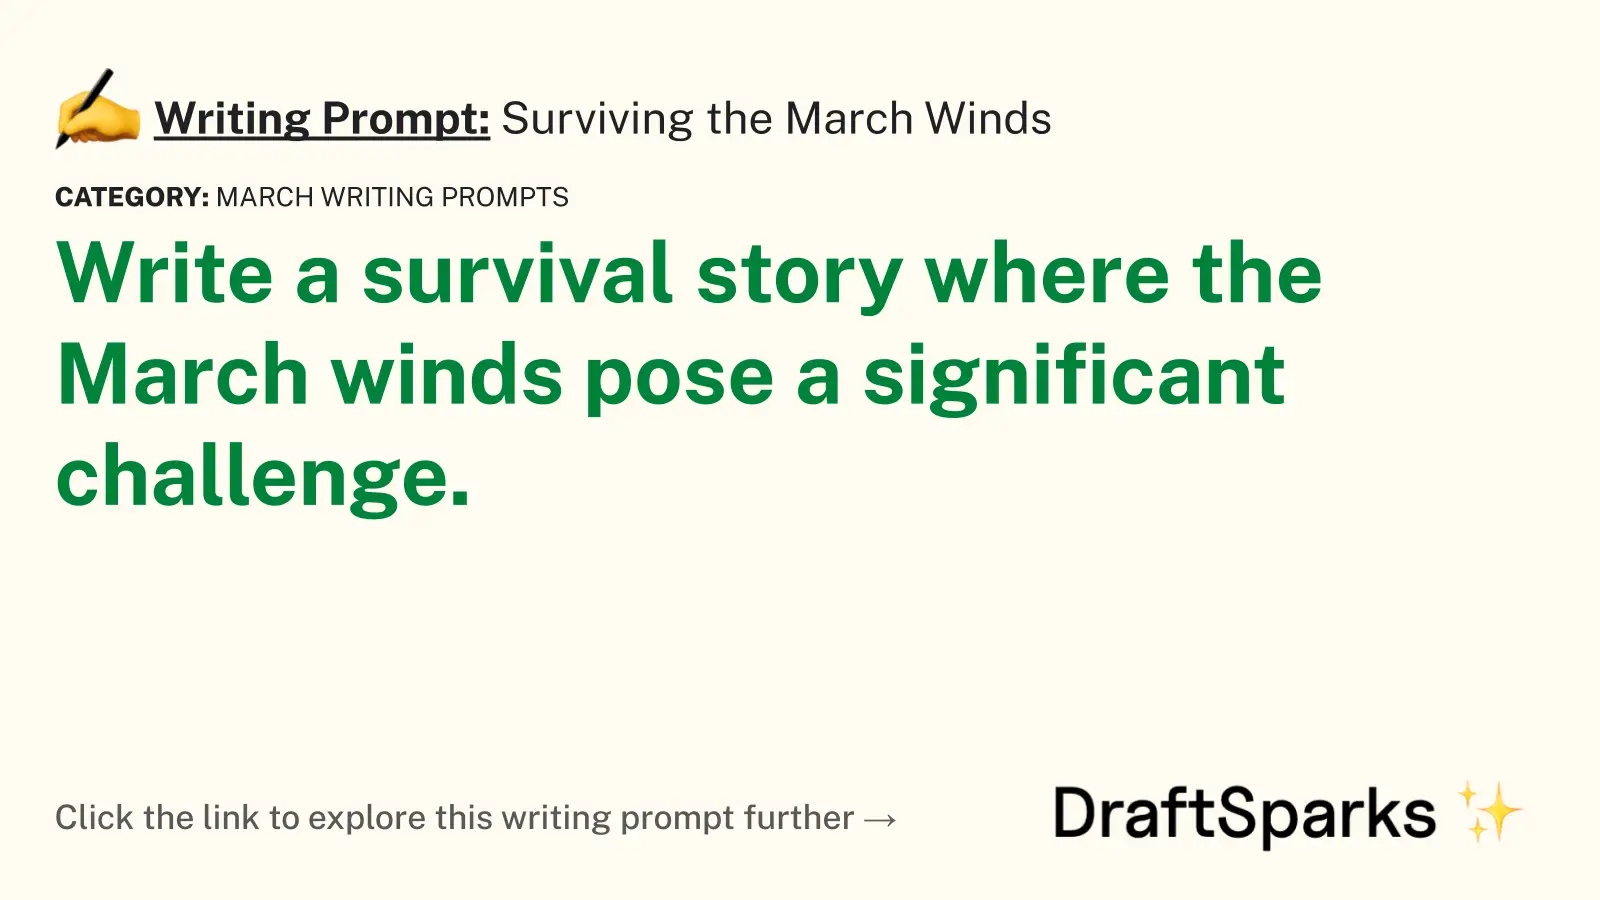 Surviving the March Winds